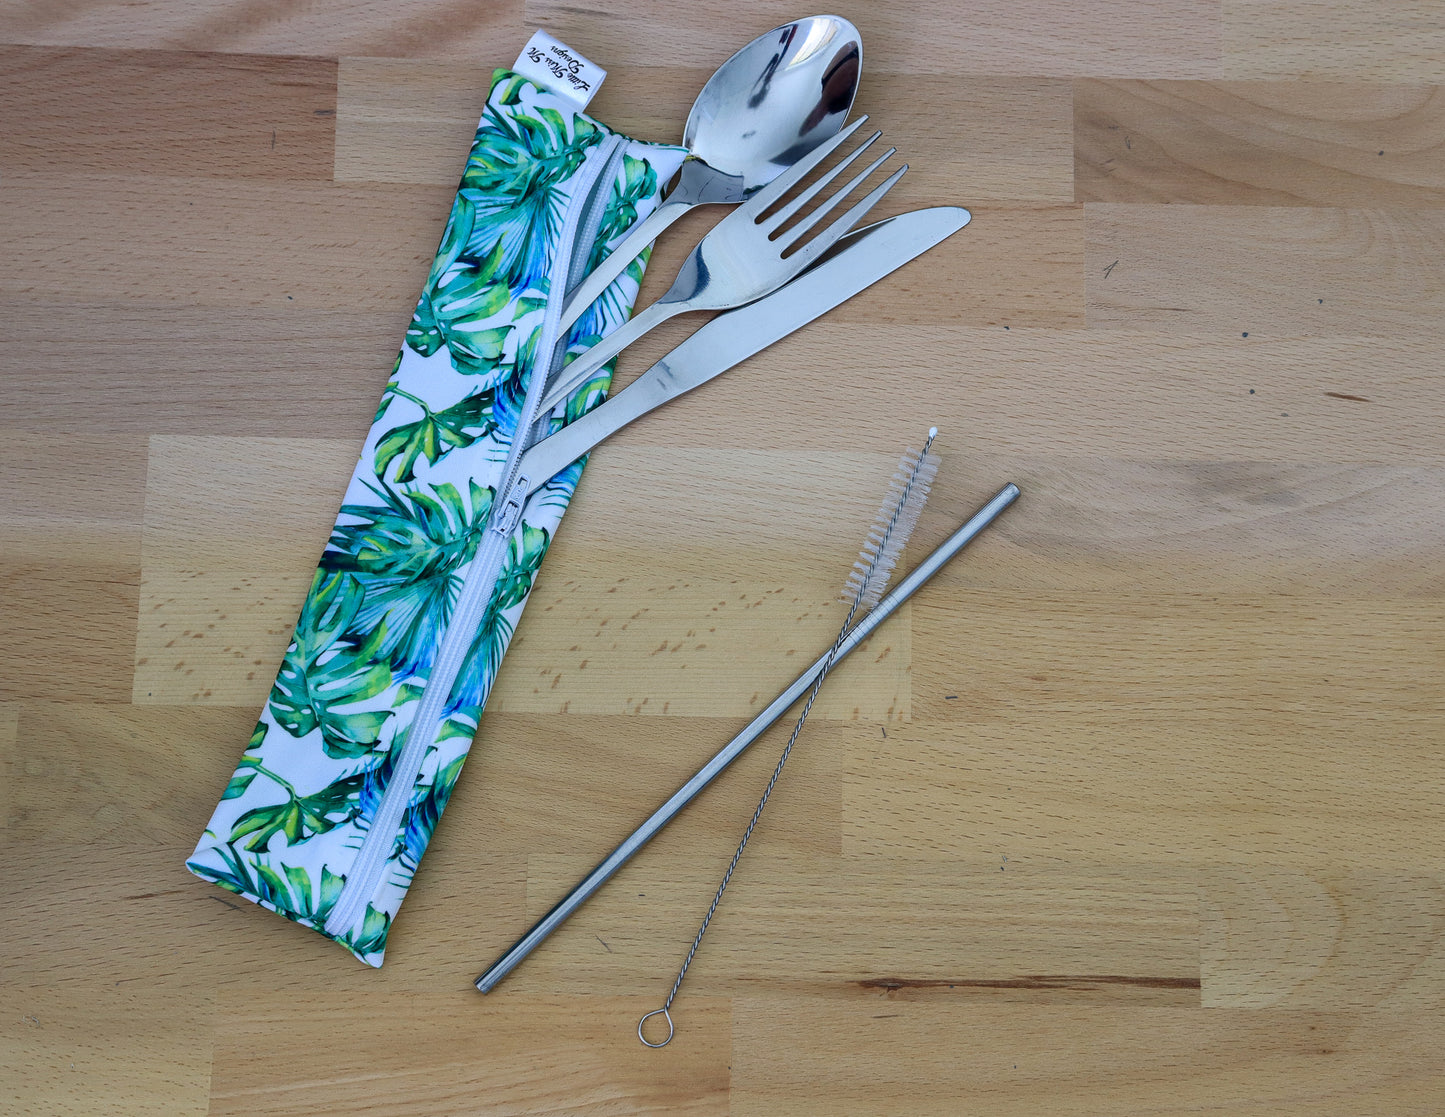 Tropical Cutlery Pouch